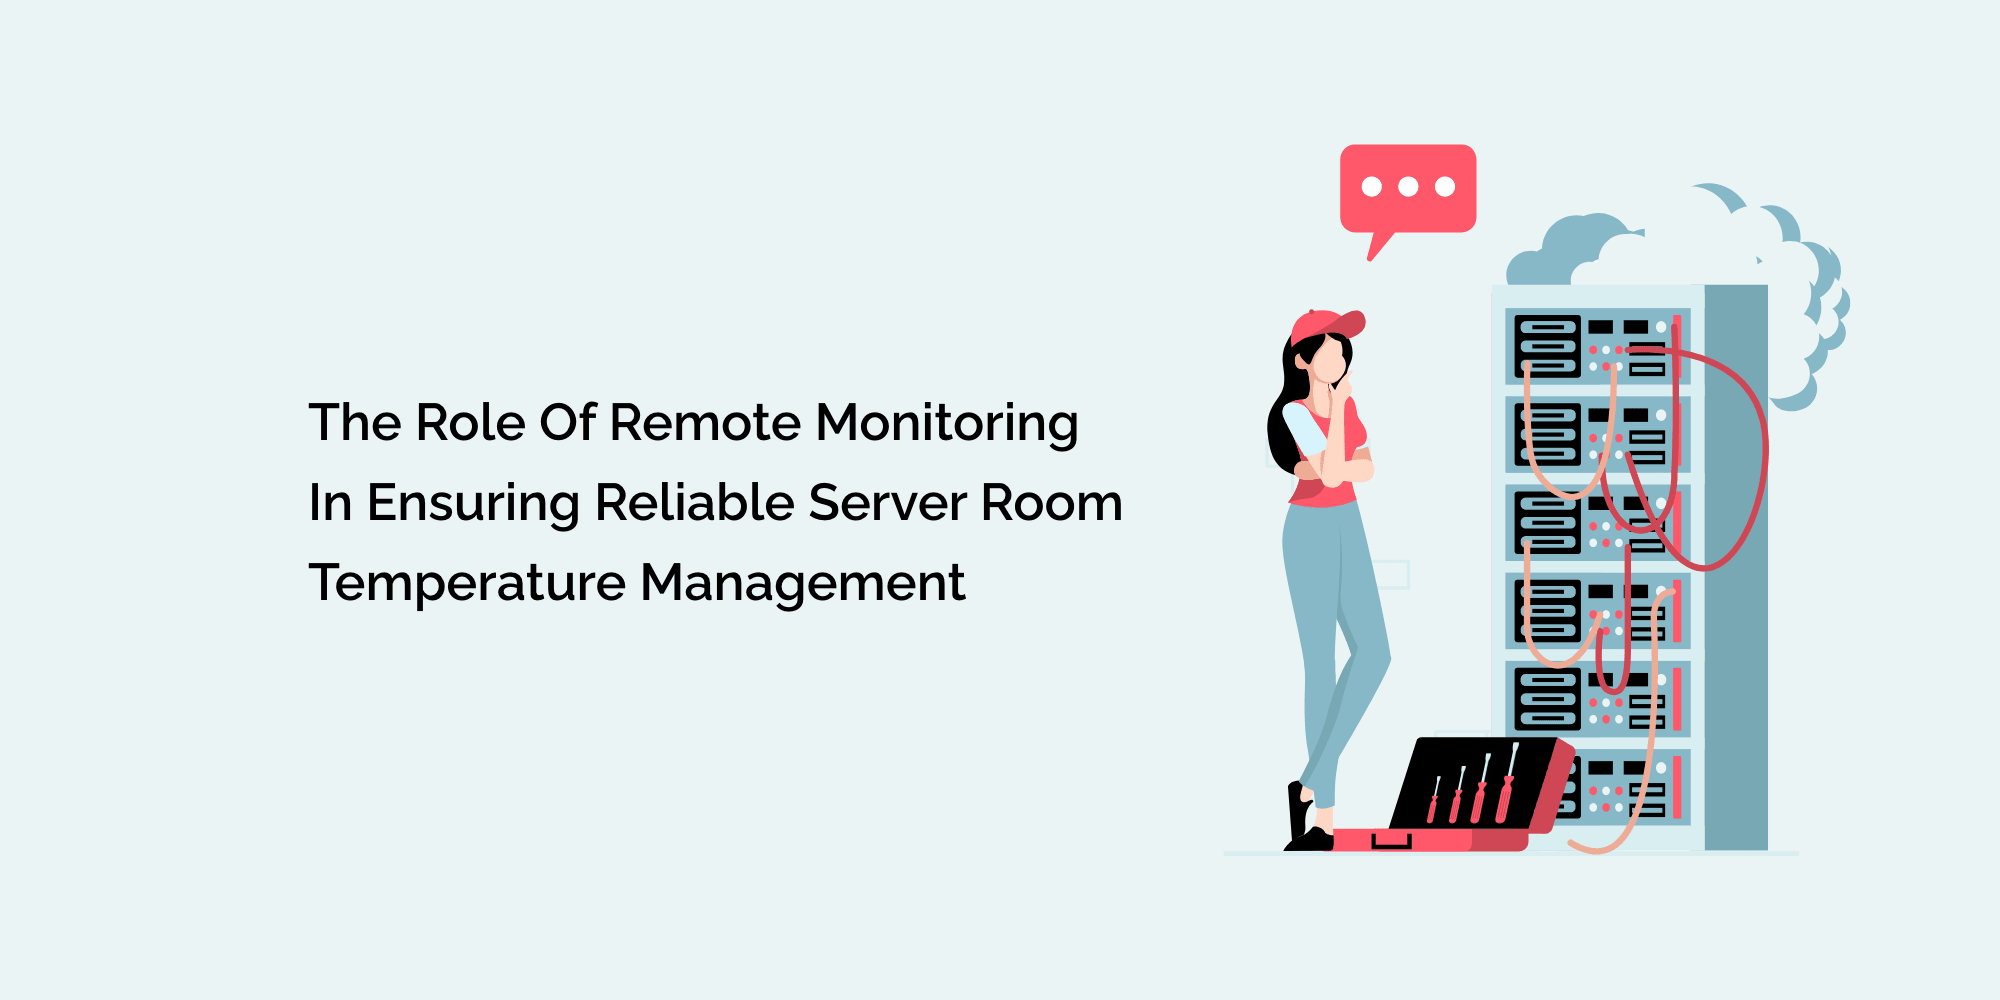 The Role of Remote Monitoring in Ensuring Reliable Server Room Temperature Management